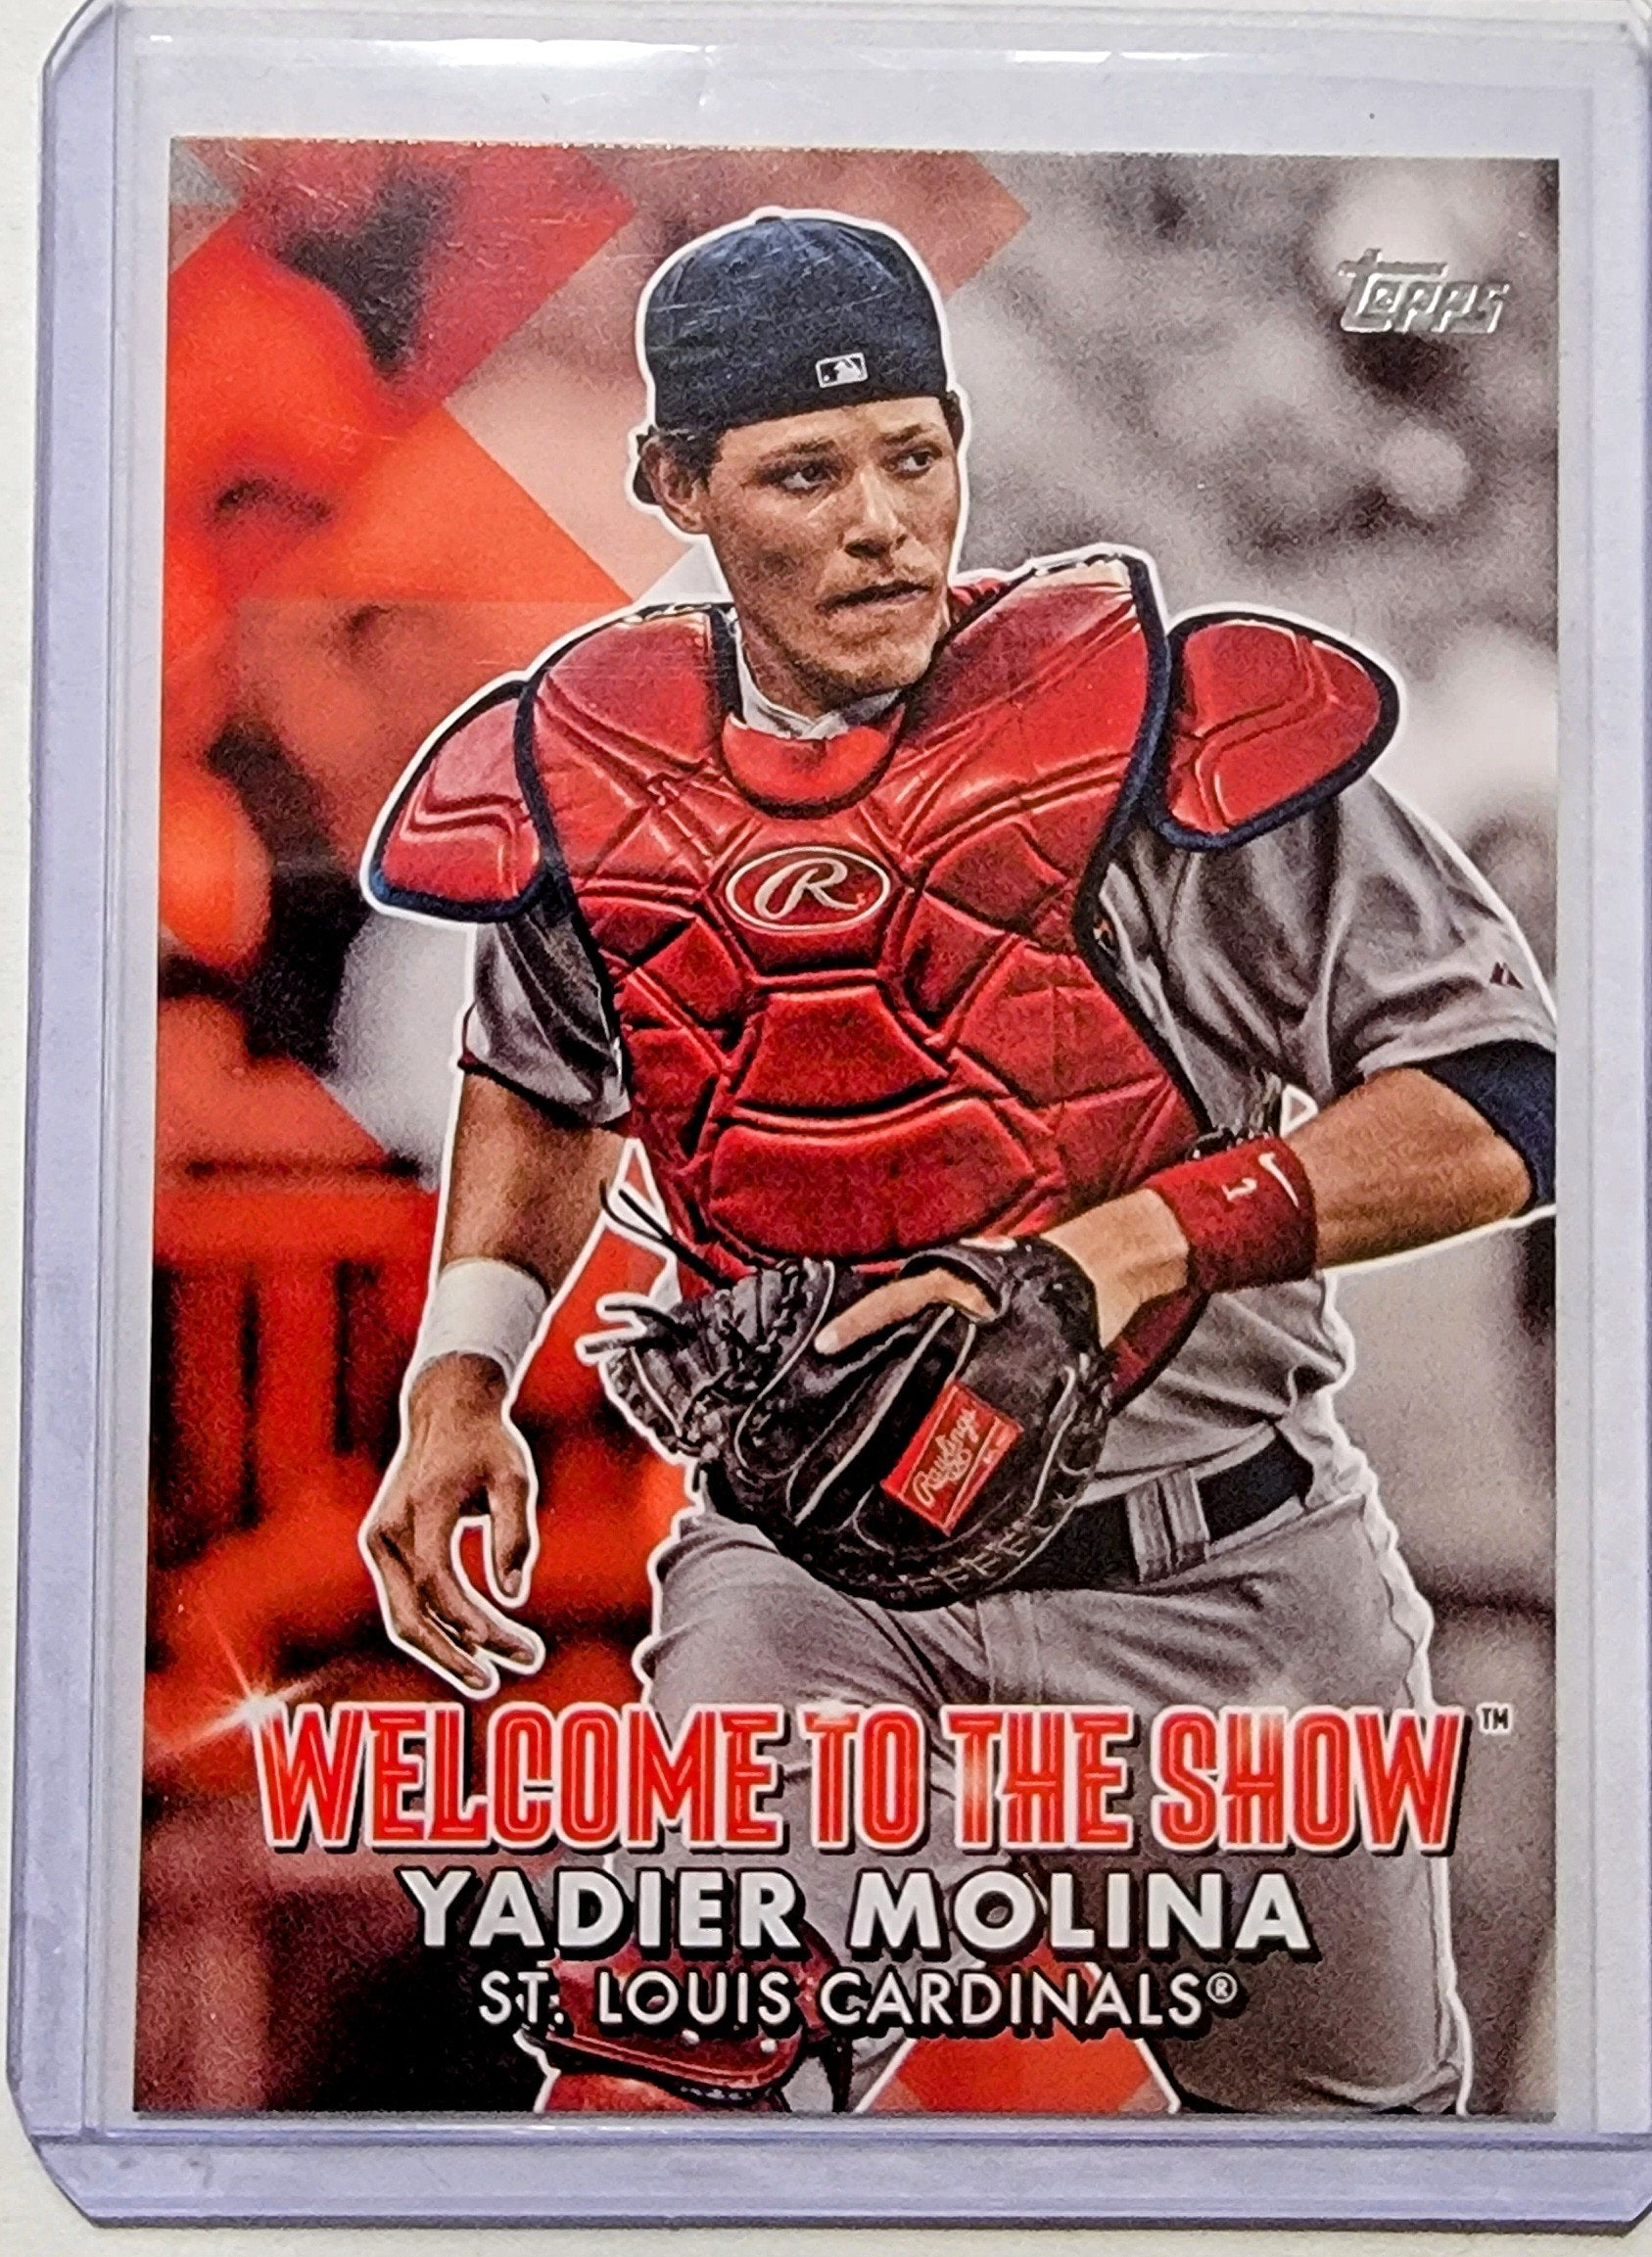 2022 Topps Series 2 Yadier Molina Welcome to the Show Insert Baseball